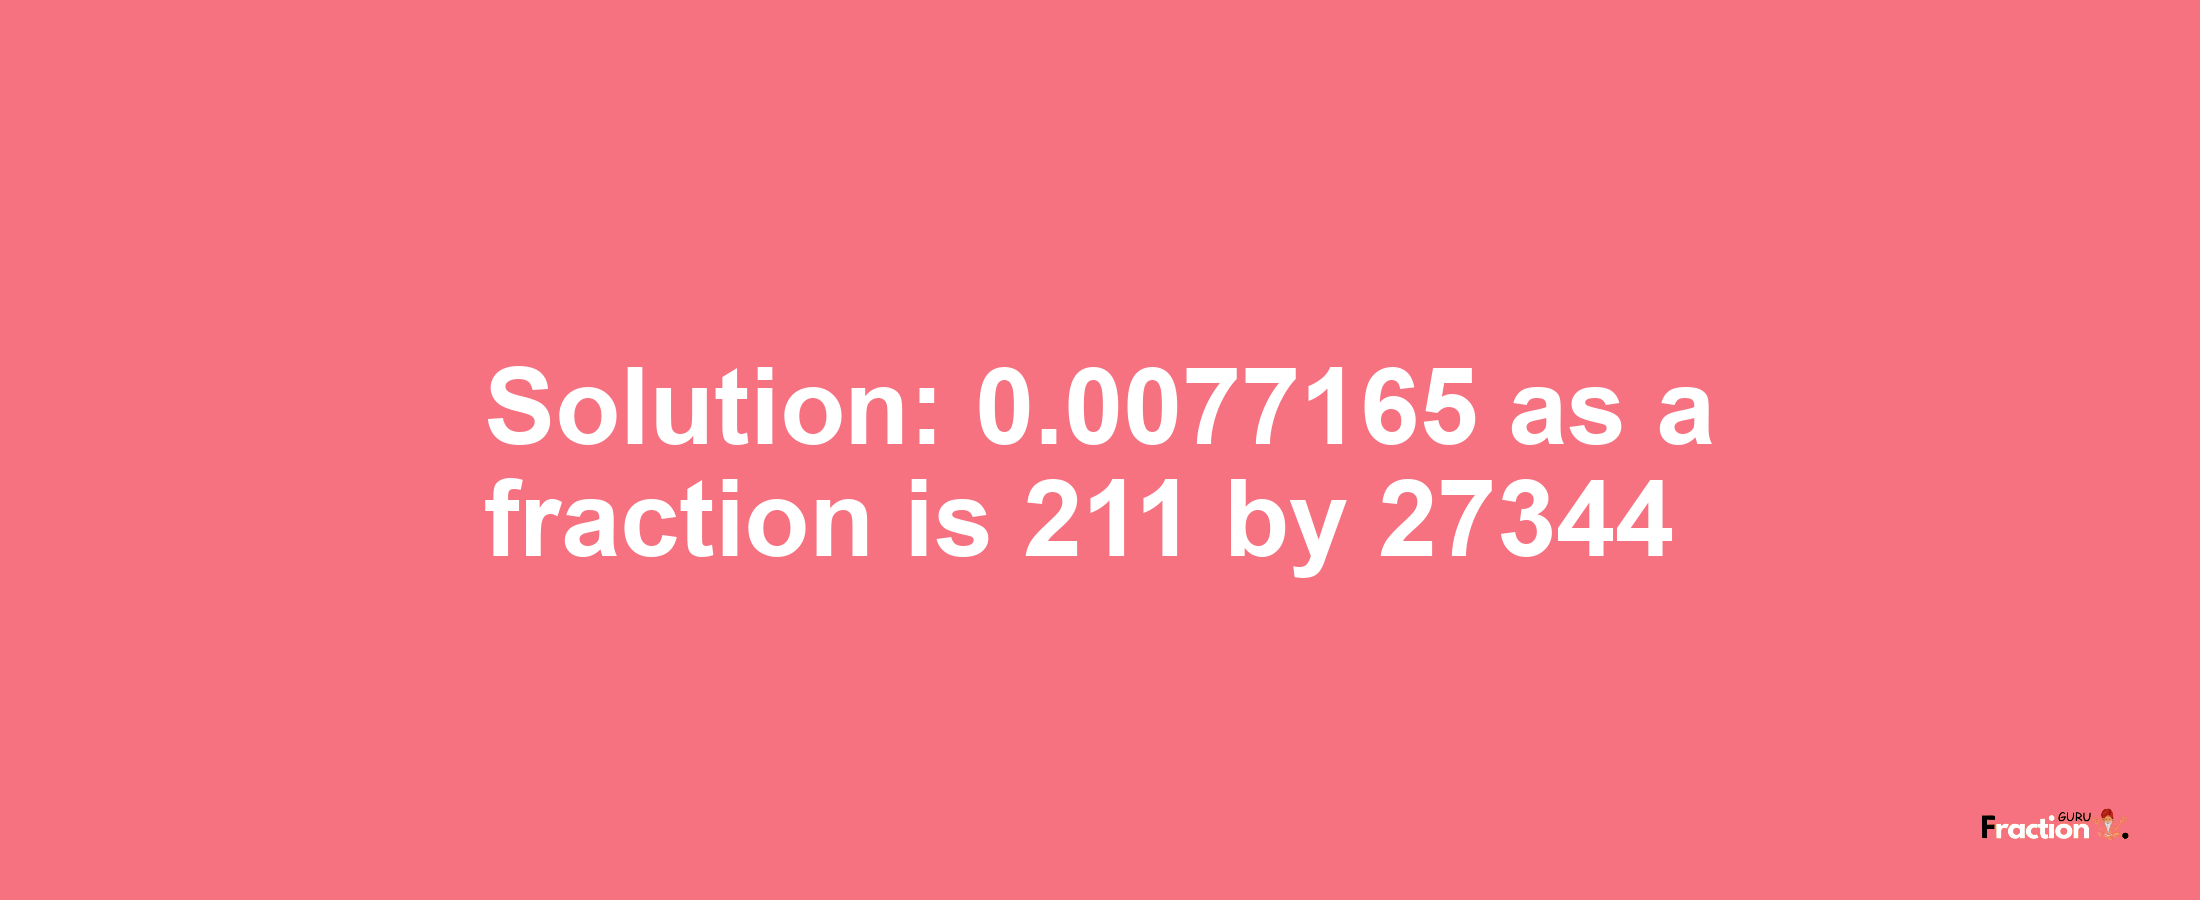 Solution:0.0077165 as a fraction is 211/27344